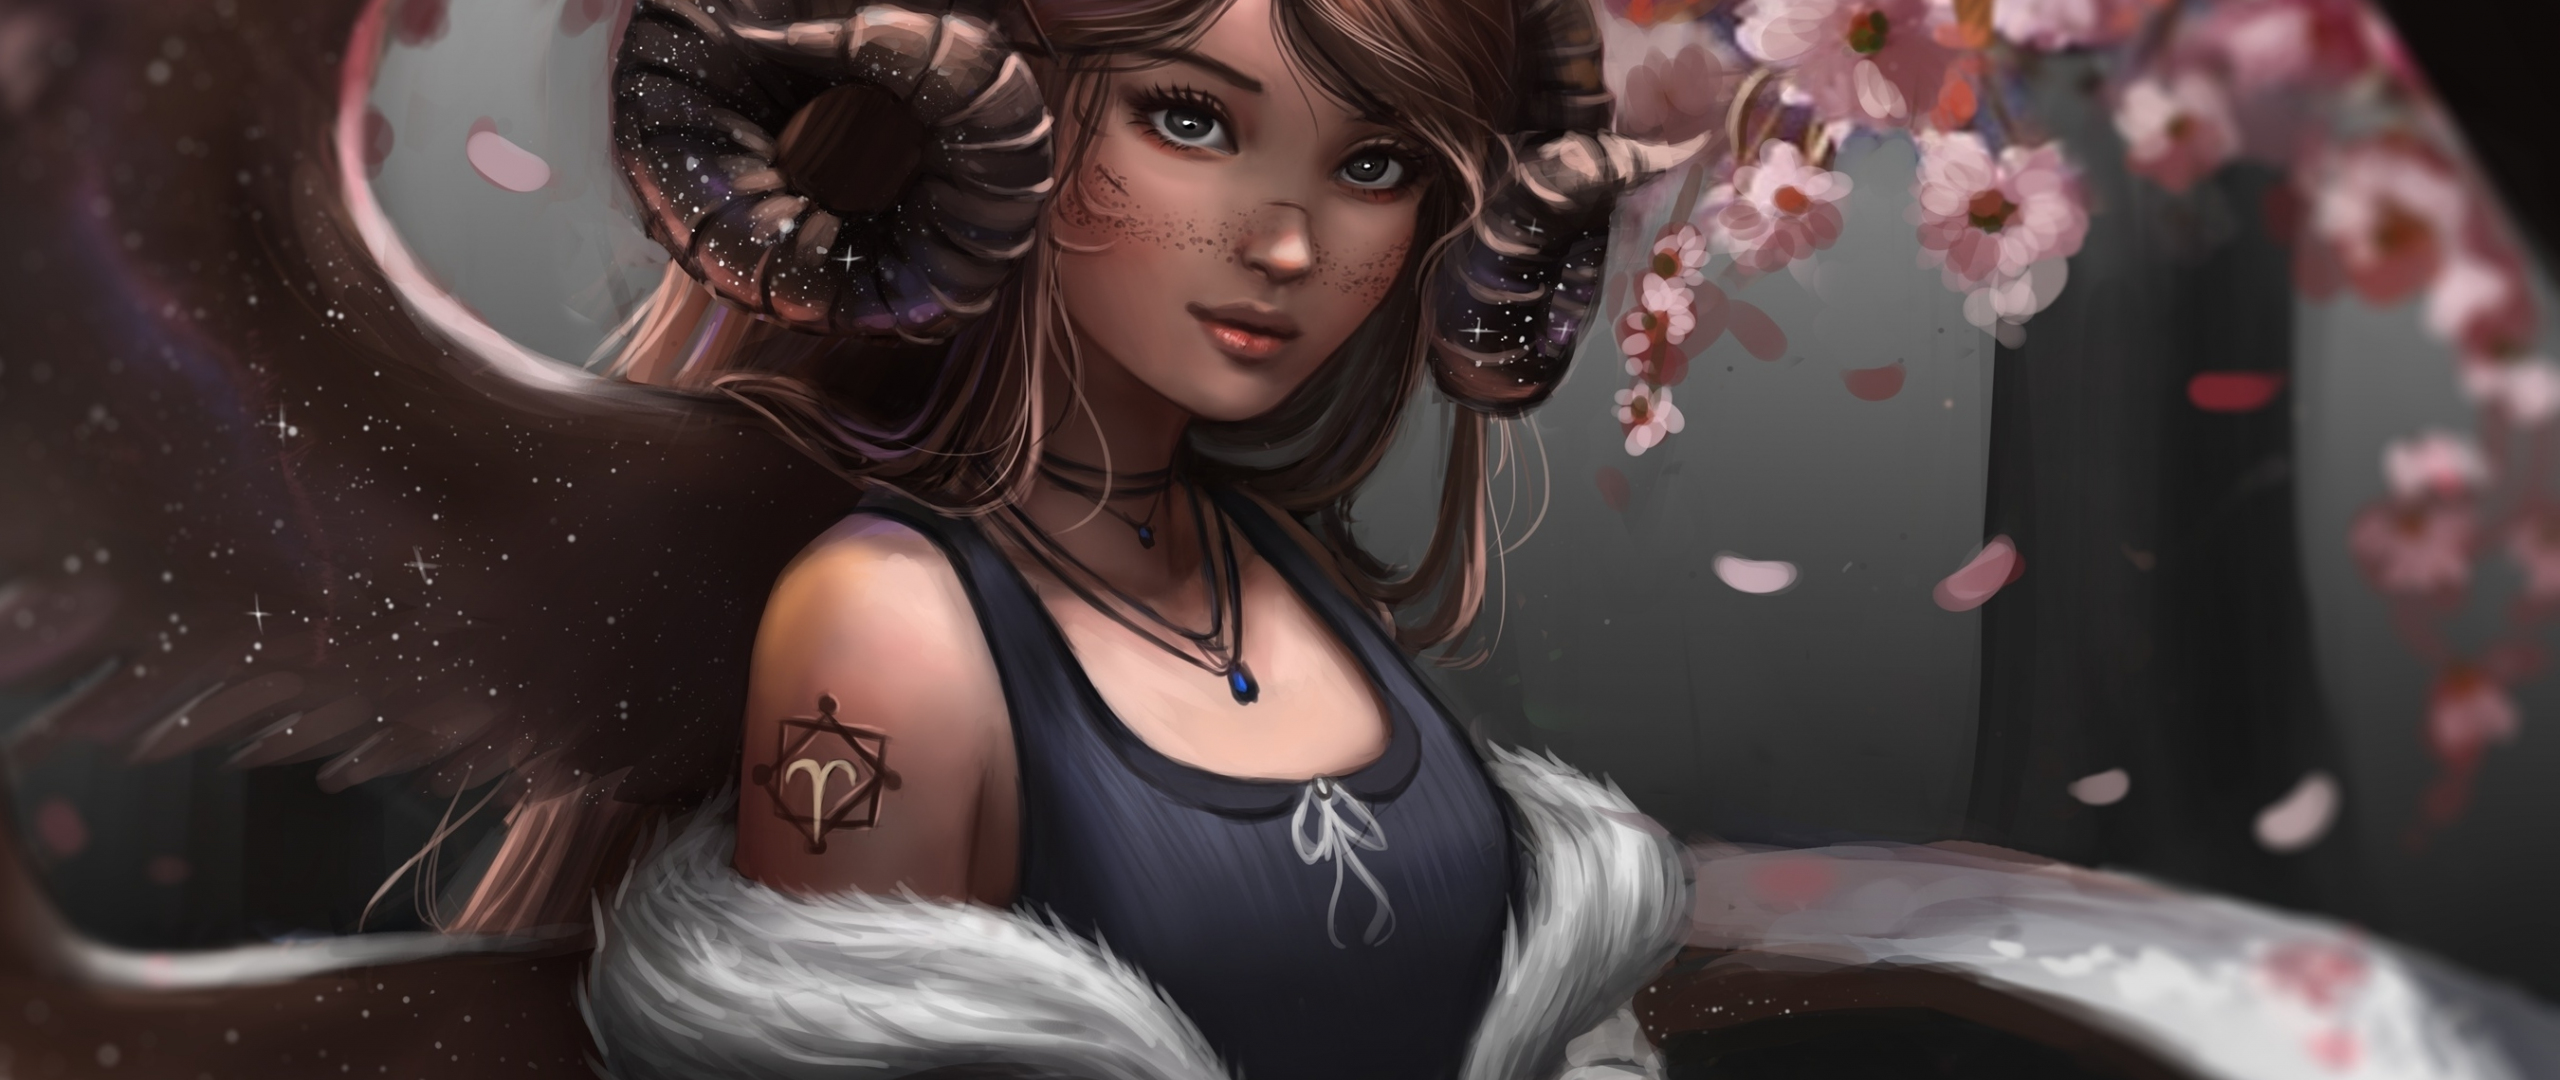 Download fantasy, aries girl, art 2560x1080 wallpaper, dual wide 2560x1080 HD image, background, 24123